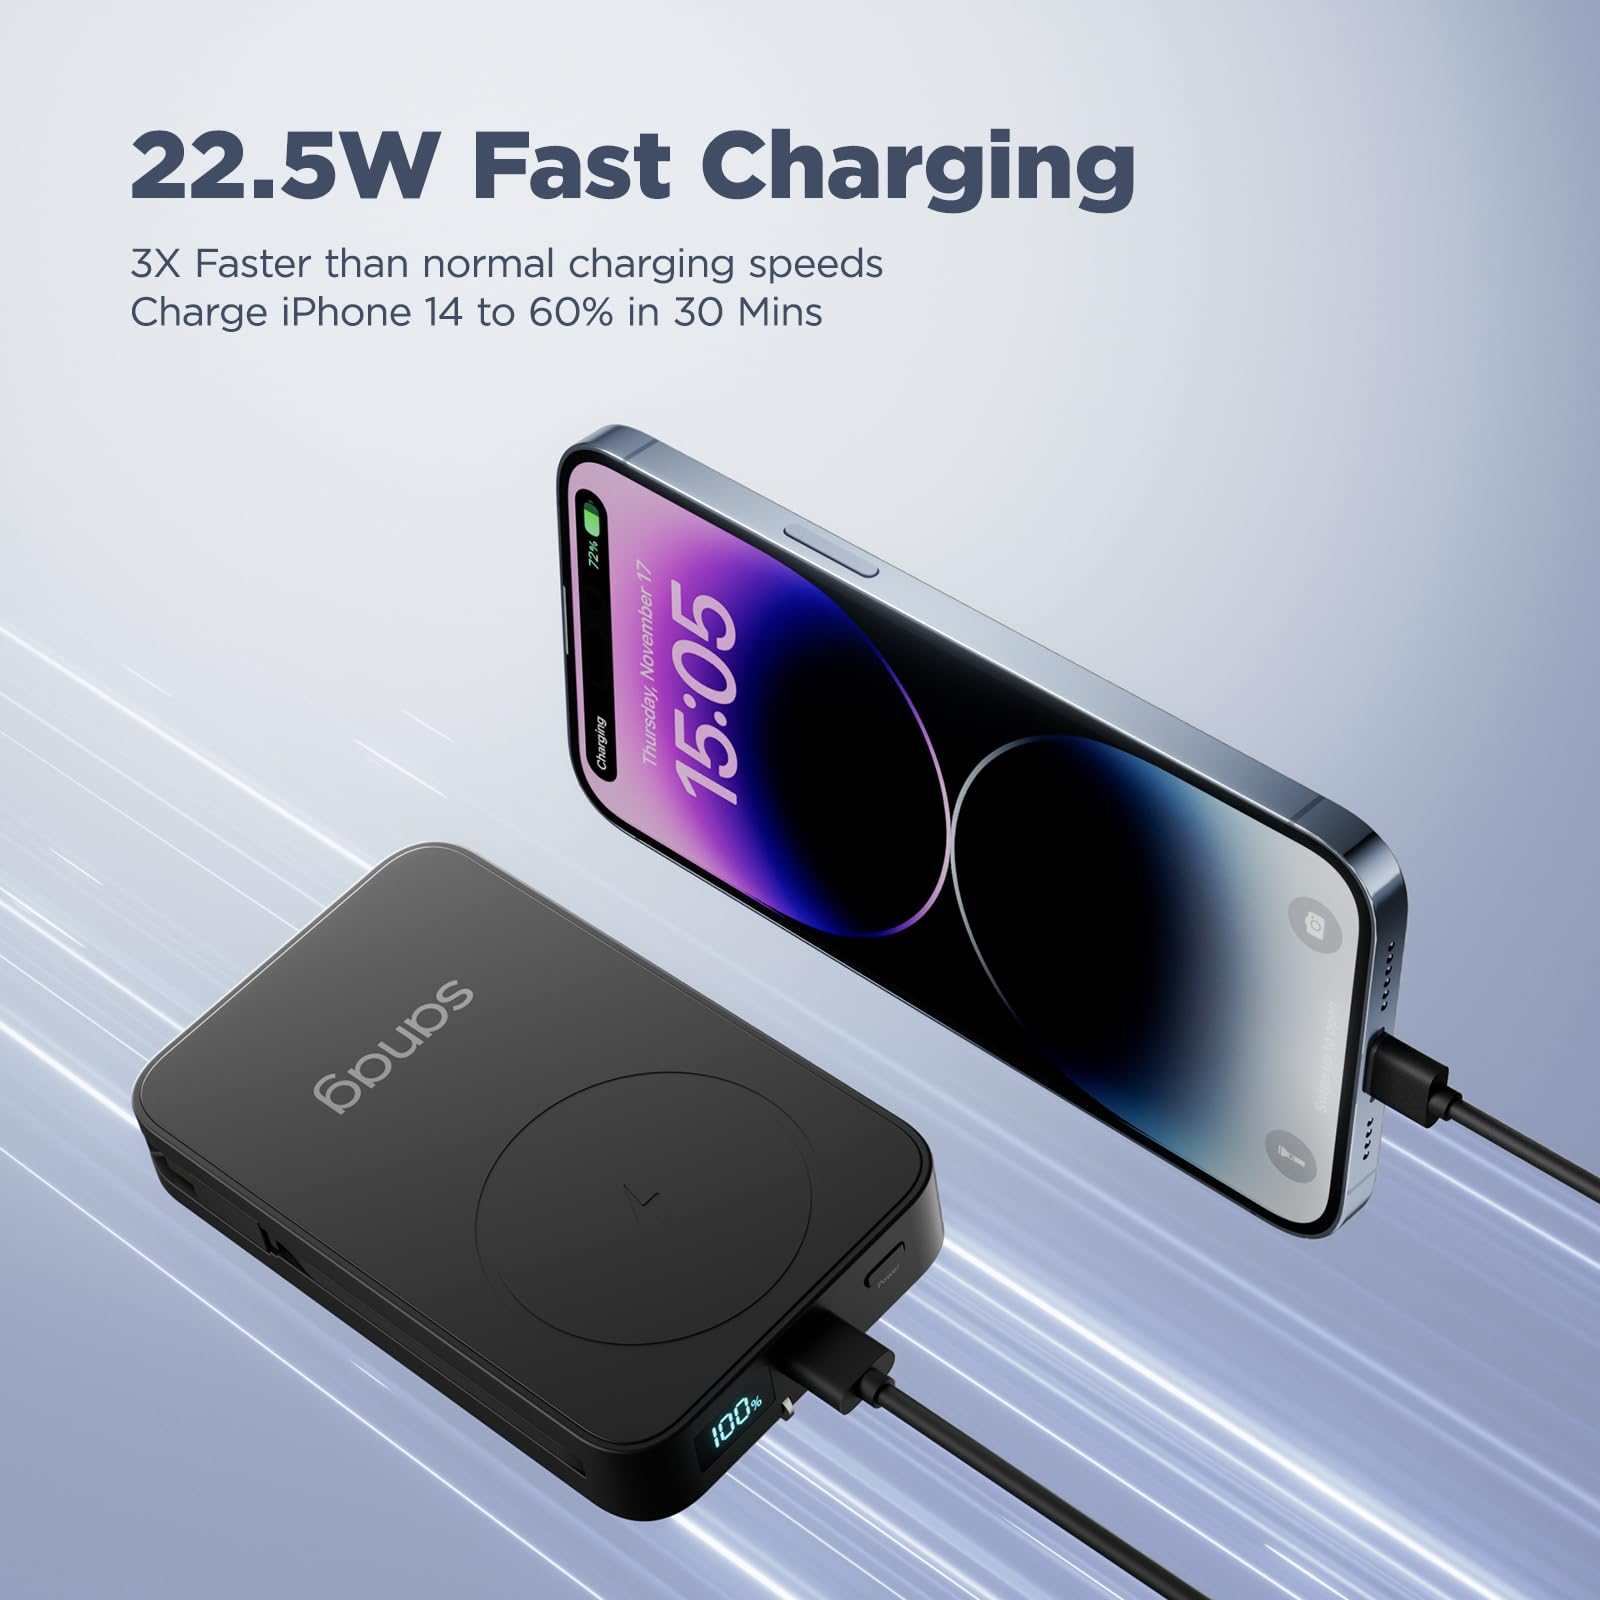 Sanag Wireless Portable Charger Power Bank 10000mAh with Built-in Cables, Magnetic Battery Pack with LED Display, AC Plug Input & 4 Output 22.5W PD Fast Charging Compatible with iPhone Android Phone